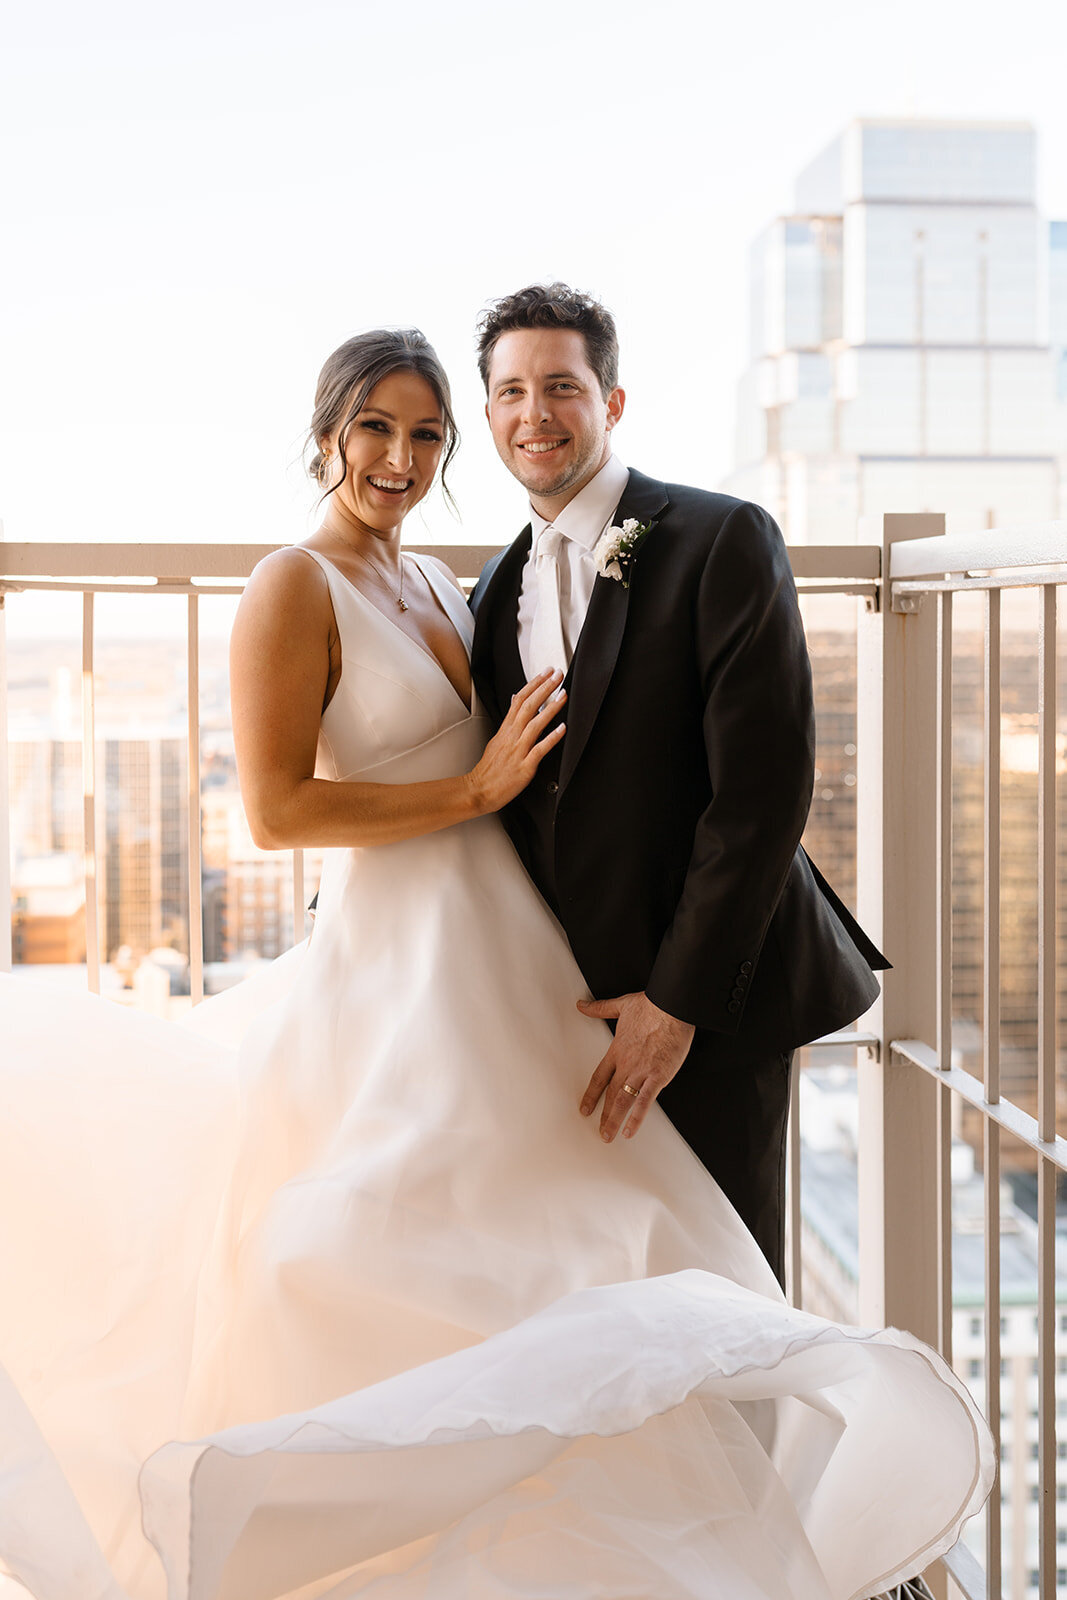 Kylie and Jack at The Grand Hall - Kansas City Wedding Photograpy - Nick and Lexie Photo Film-755